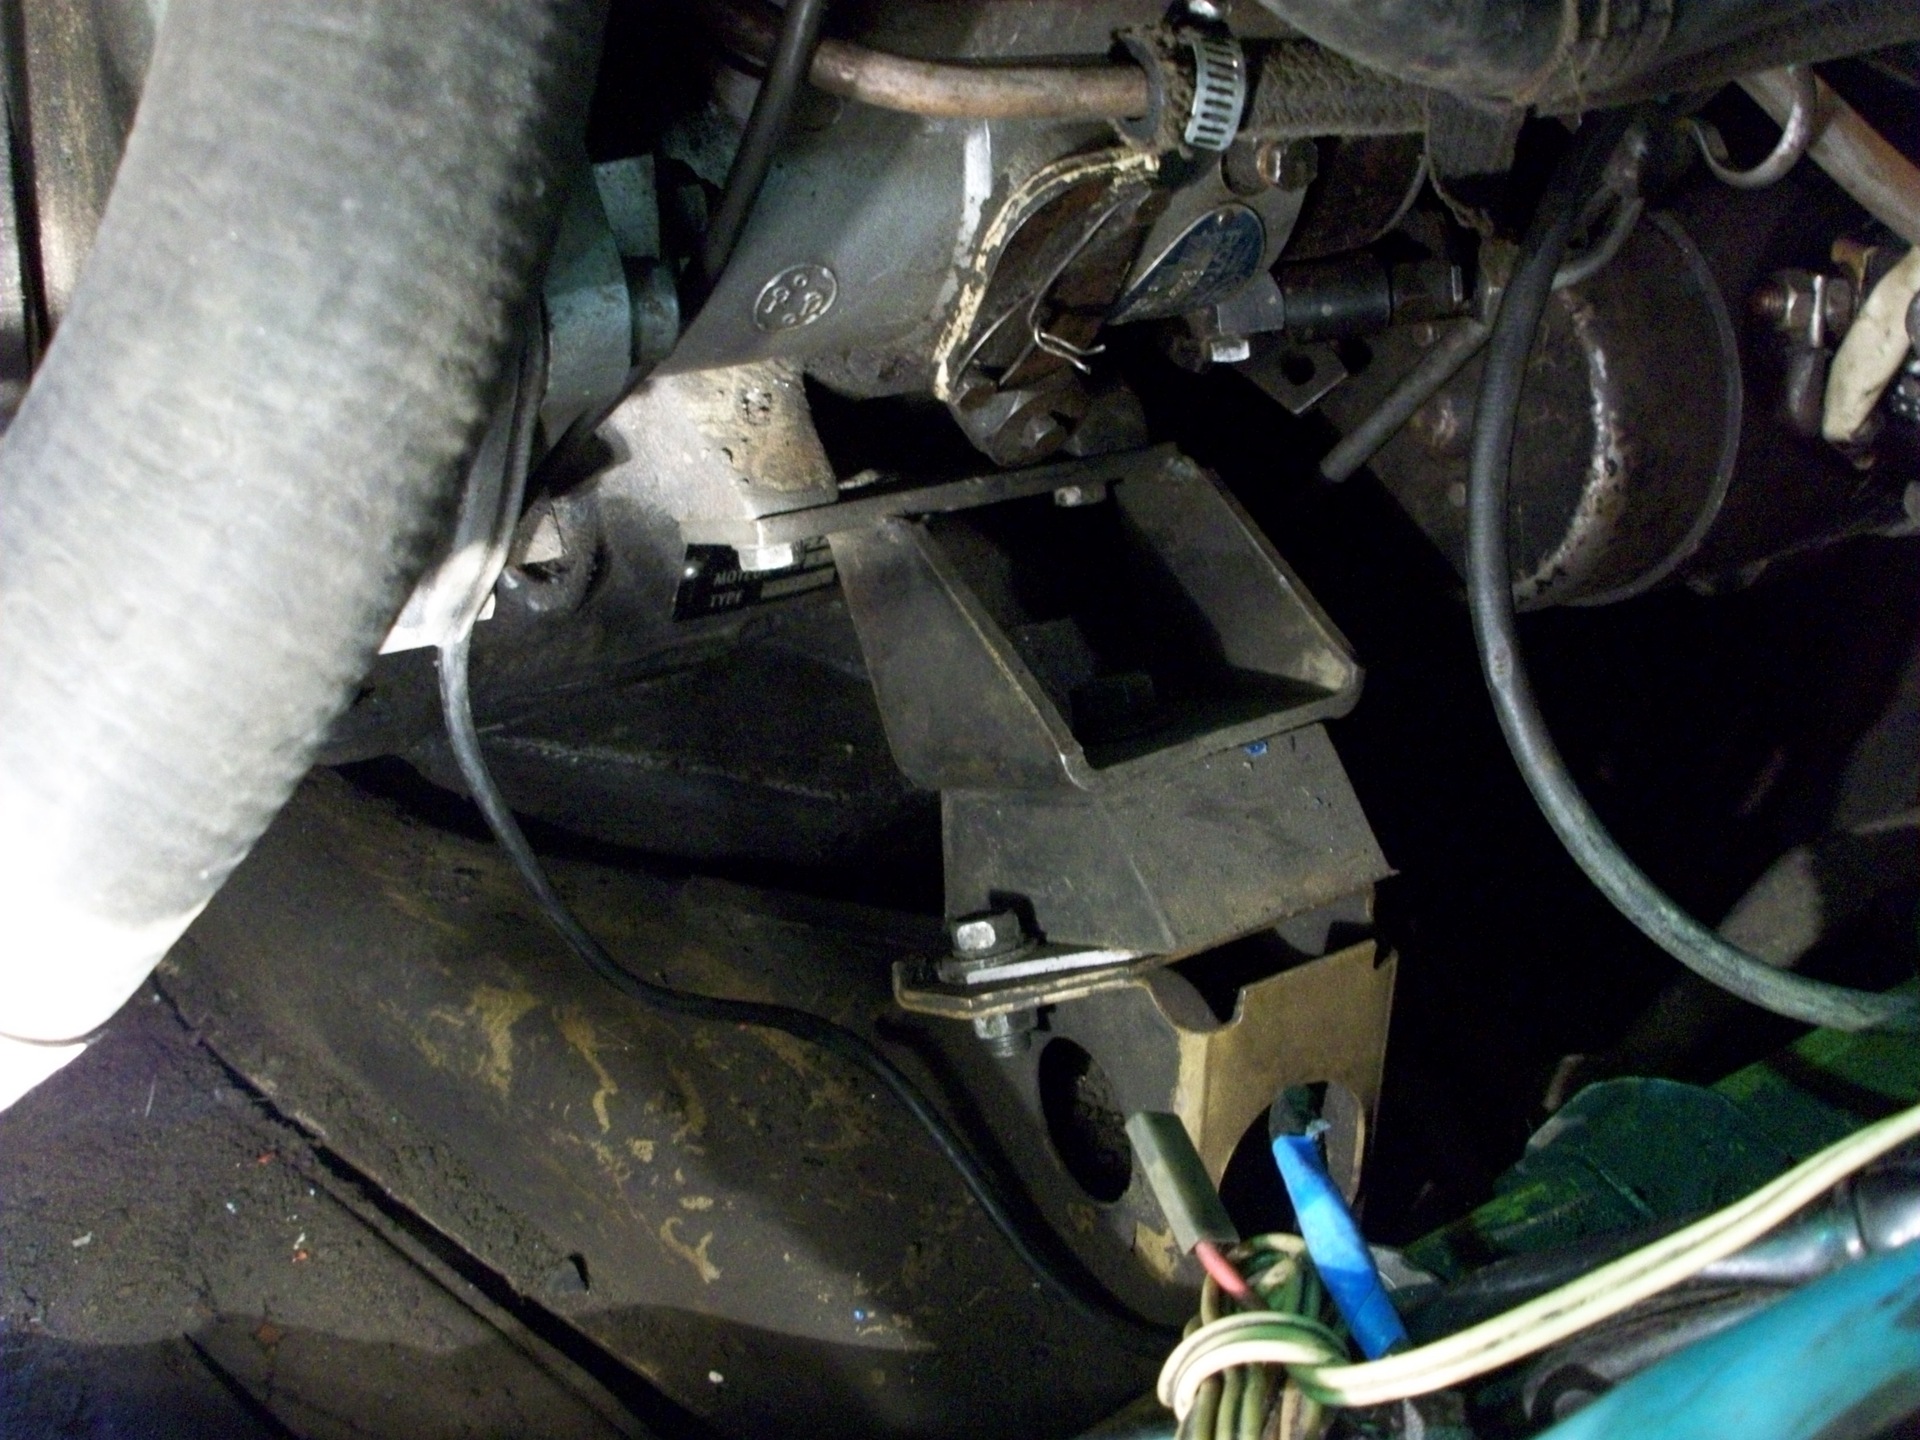 replacement of engine mountings - Toyota Cressida 1979